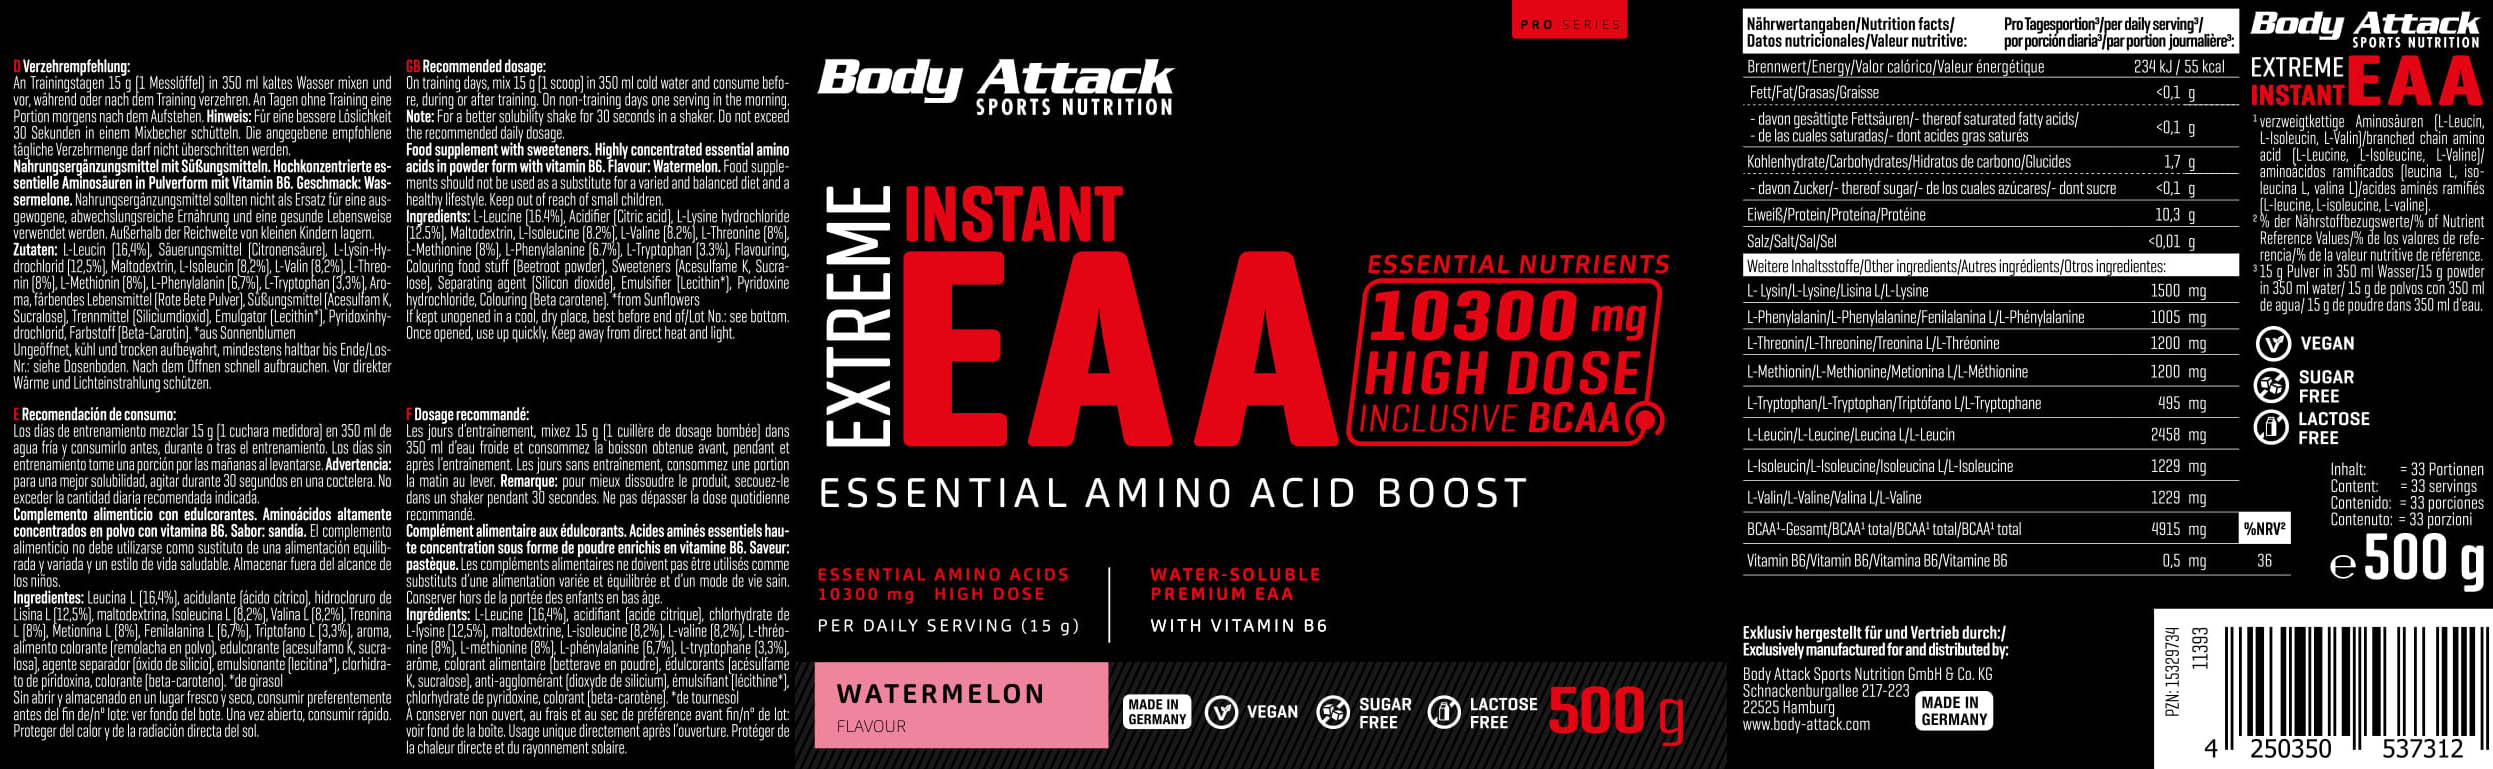 Body Attack Extreme Instant EAA (500g Dose)